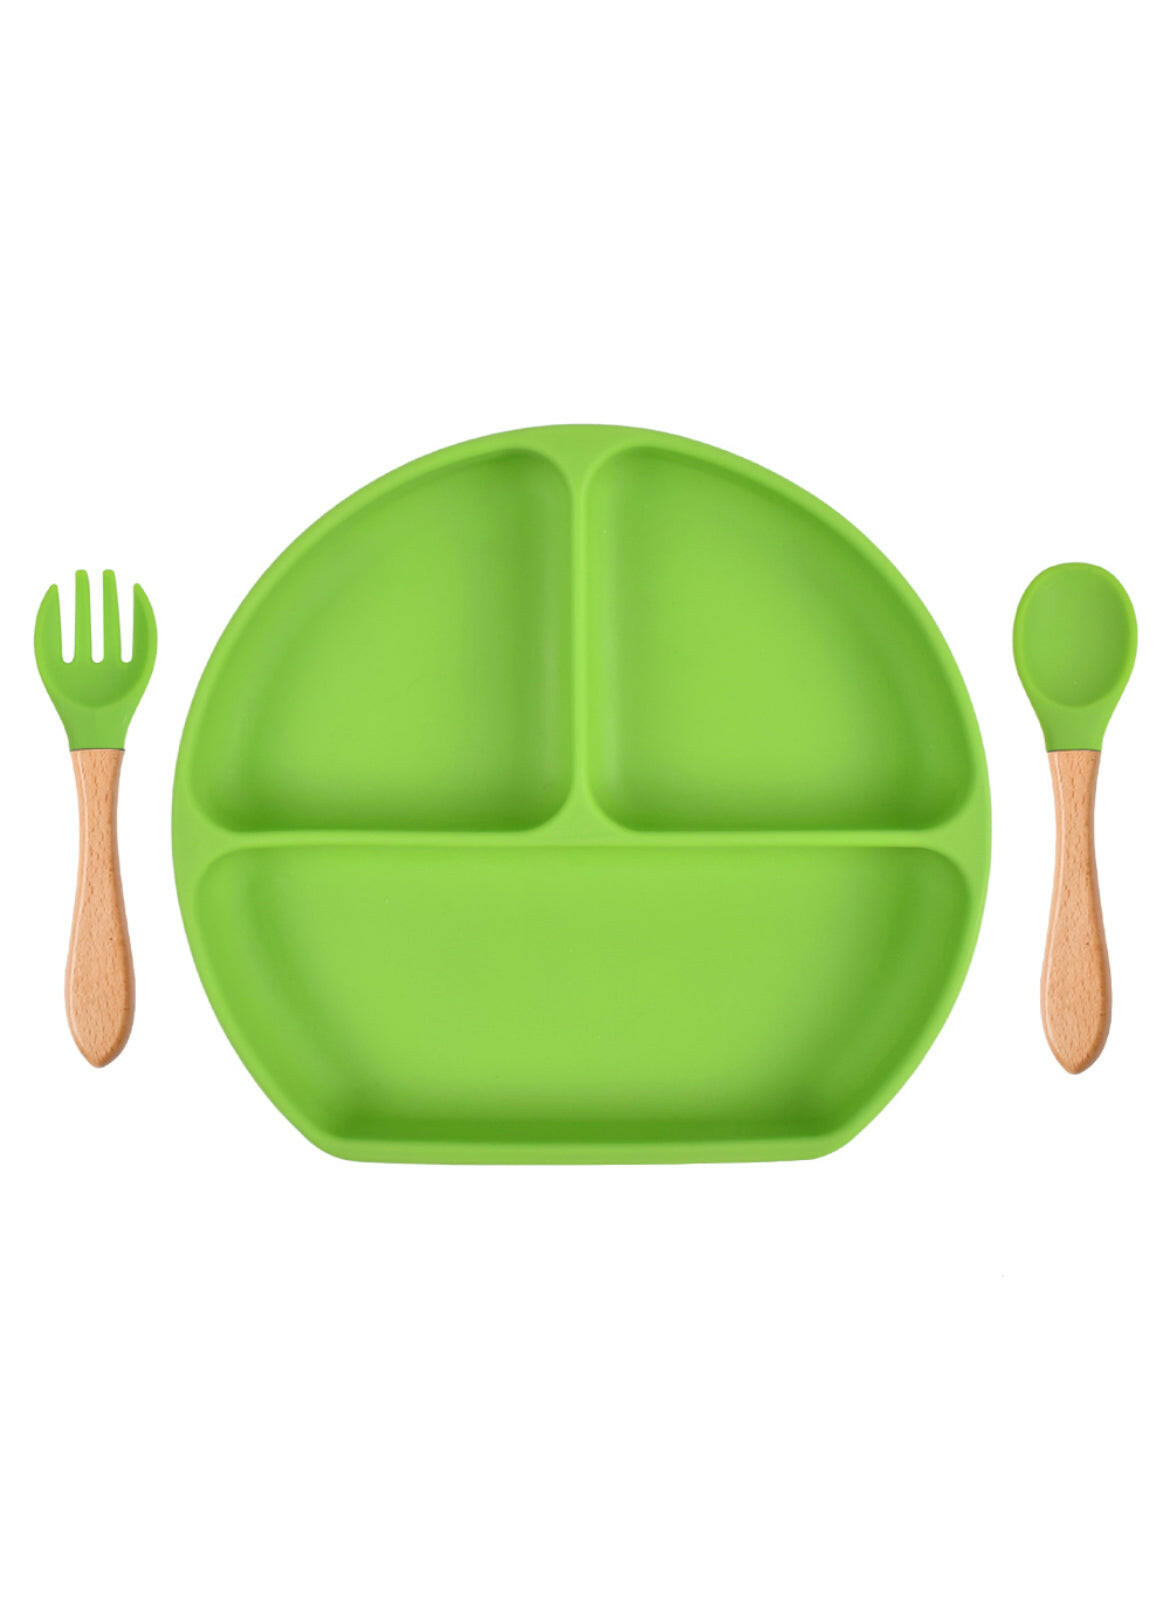 Suction Plate for Toddlers.